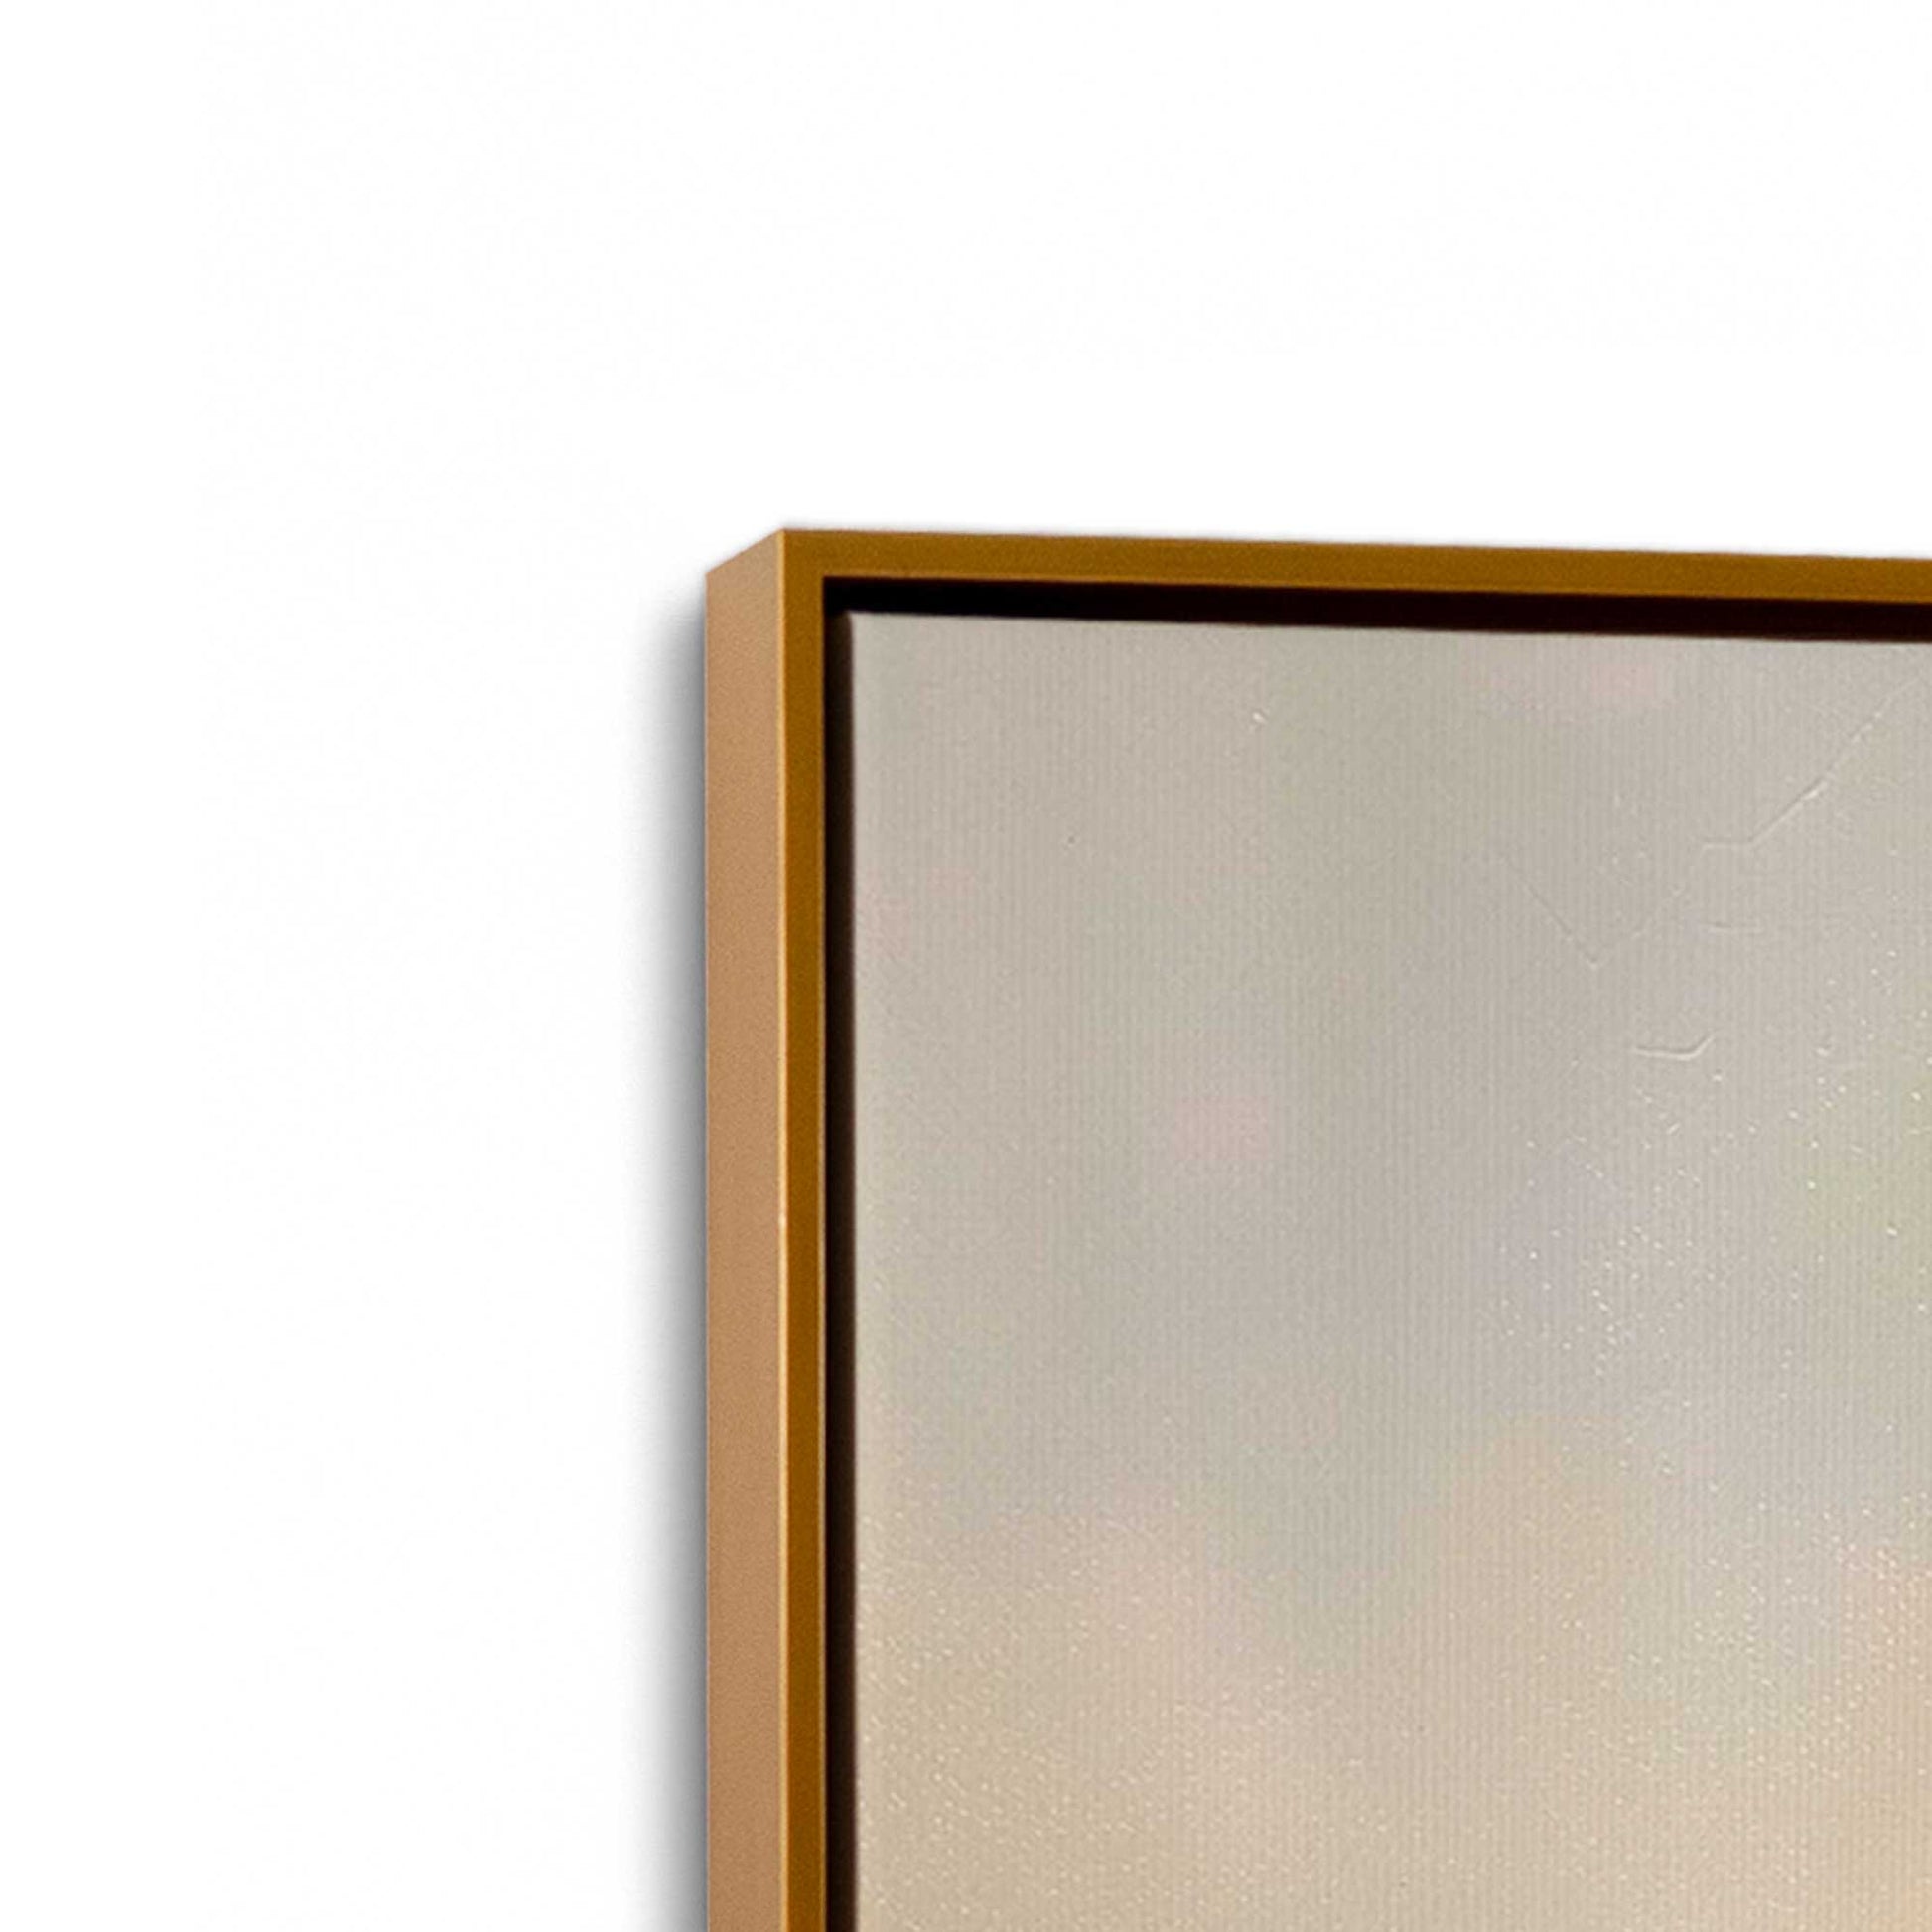 [Color:Polished Gold], Picture of the corner of the art